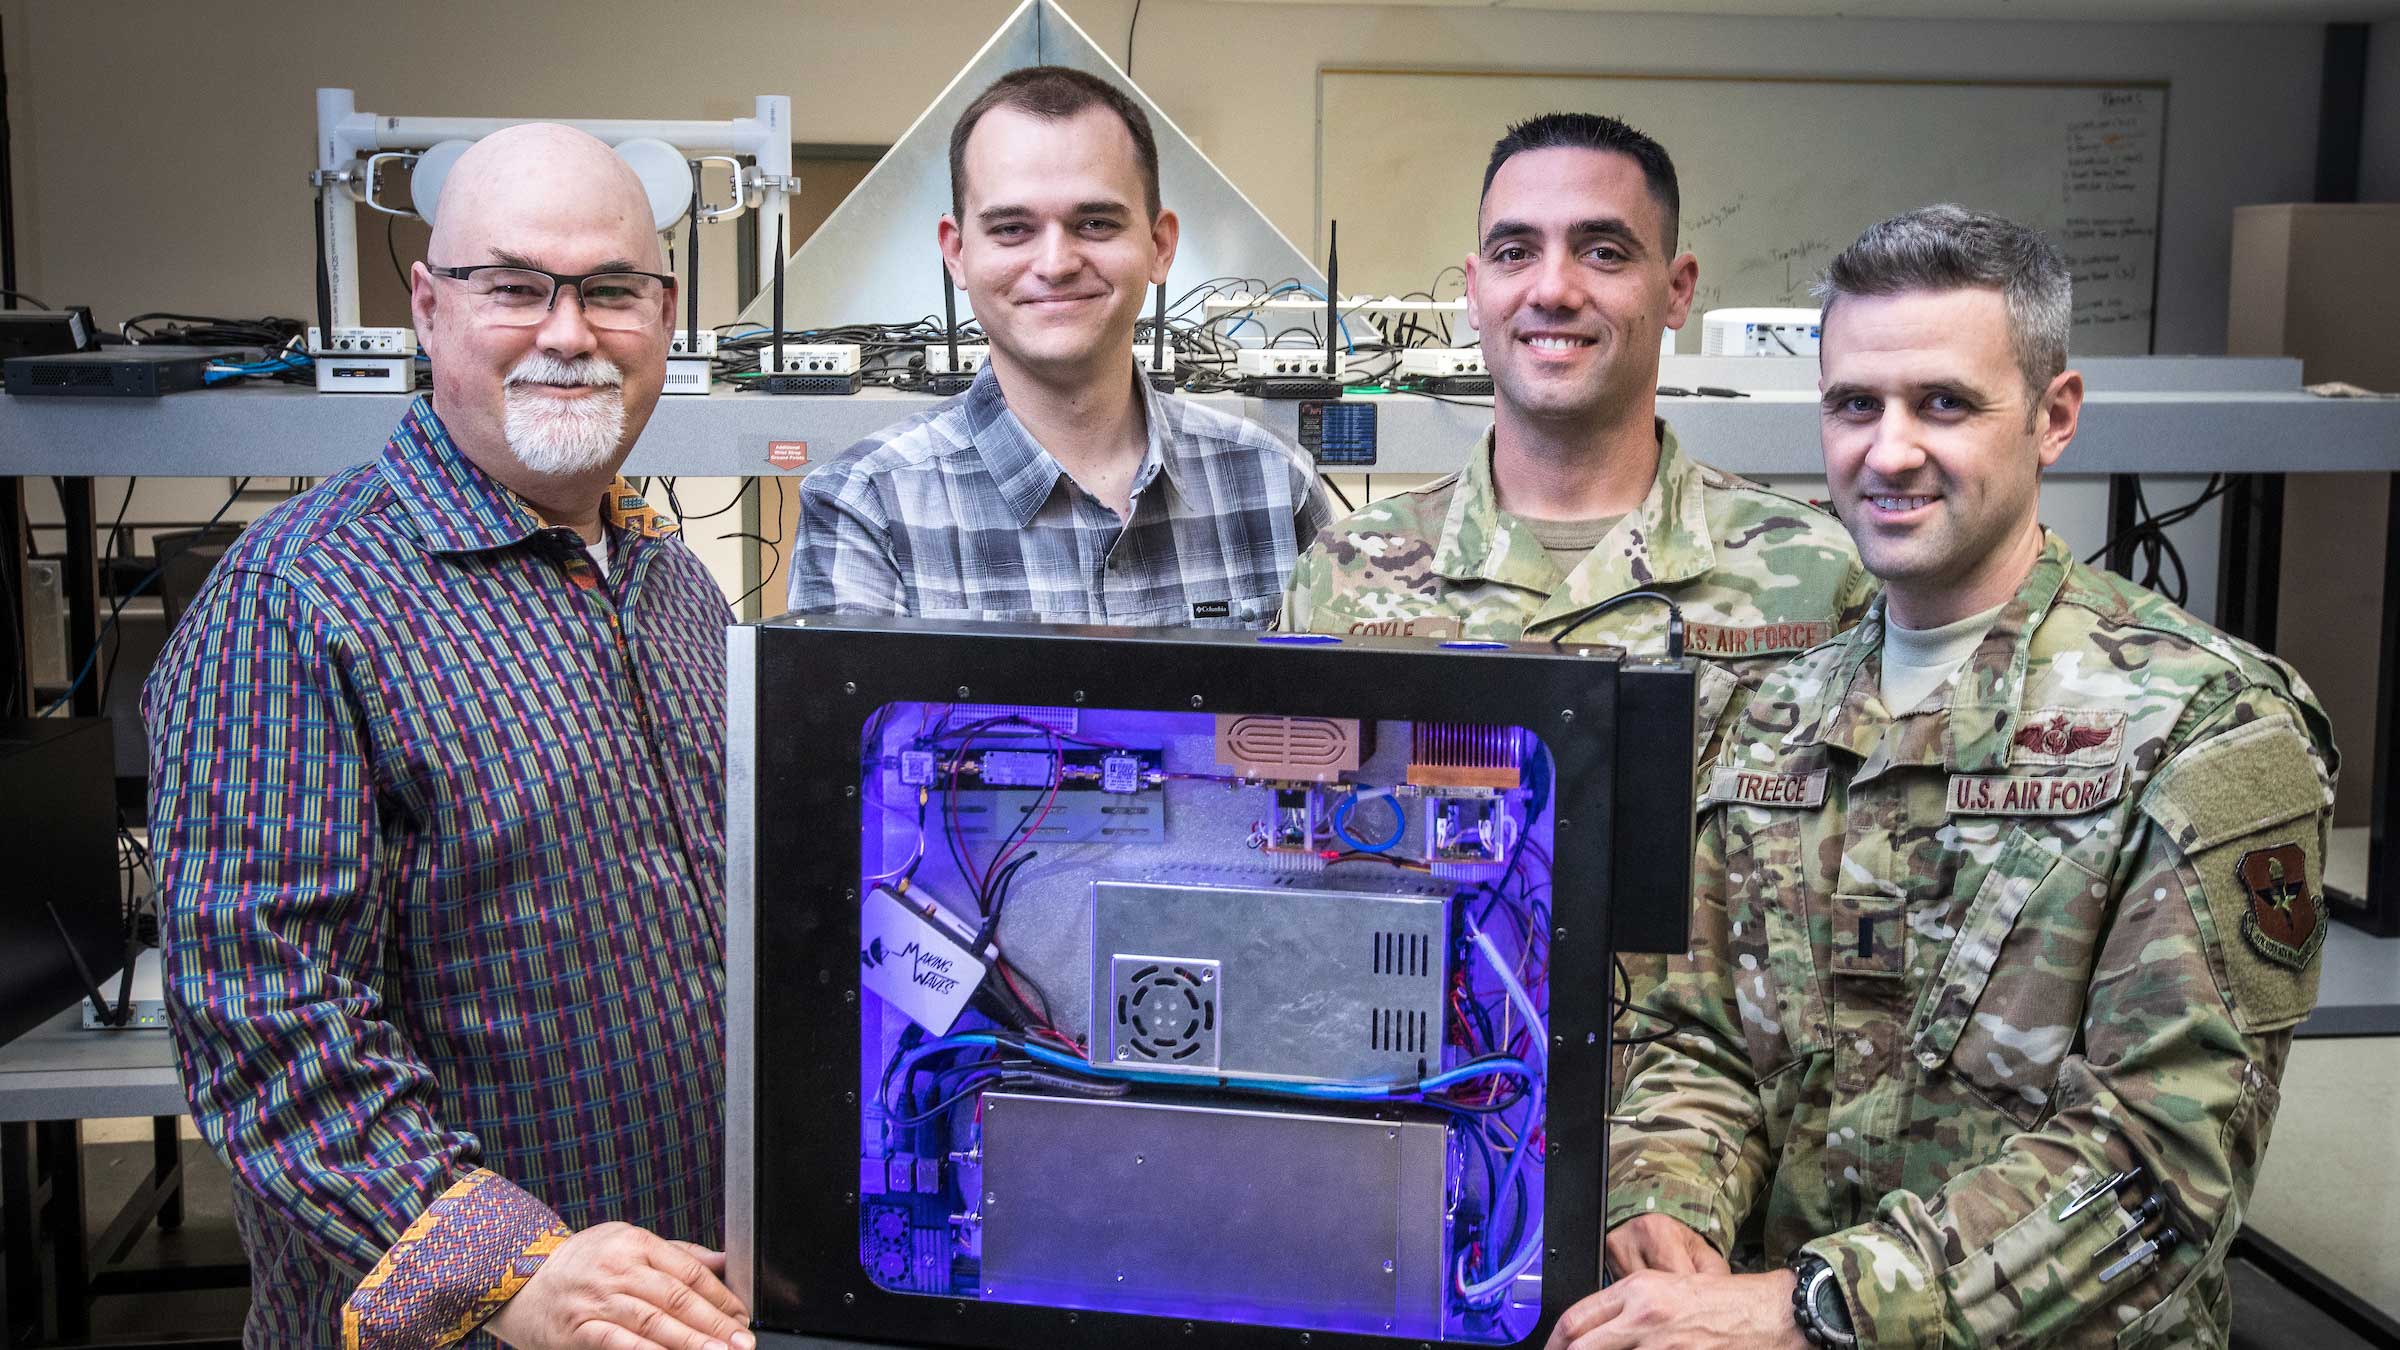 Dan Bliss and the three other members of the Making Waves team stand with their proof-of-concept threat emitter, DUMTE